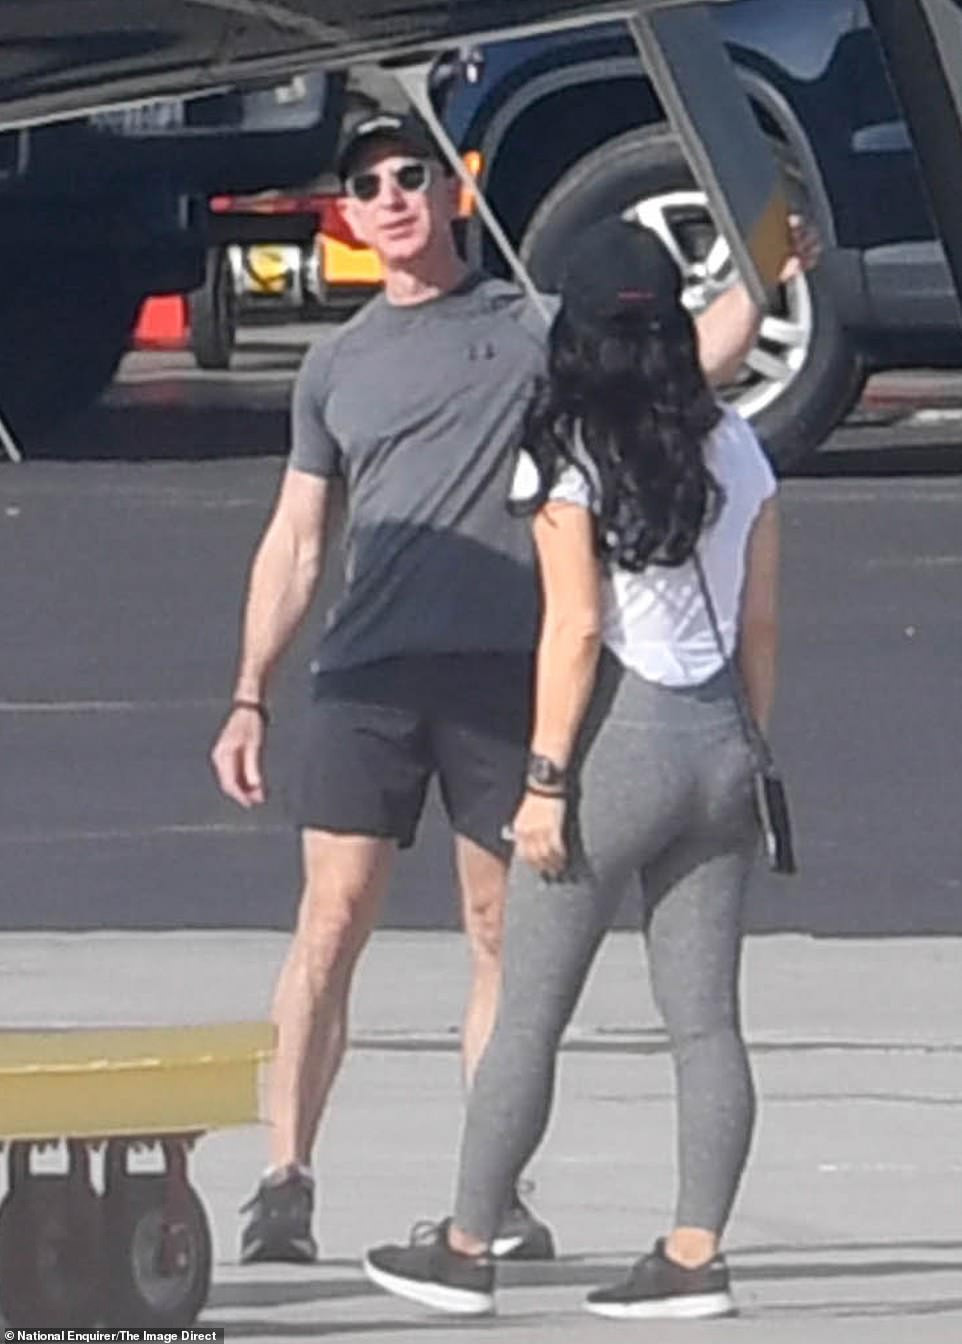 More photos of World's richest man Jeff Bezos and his mistress ...